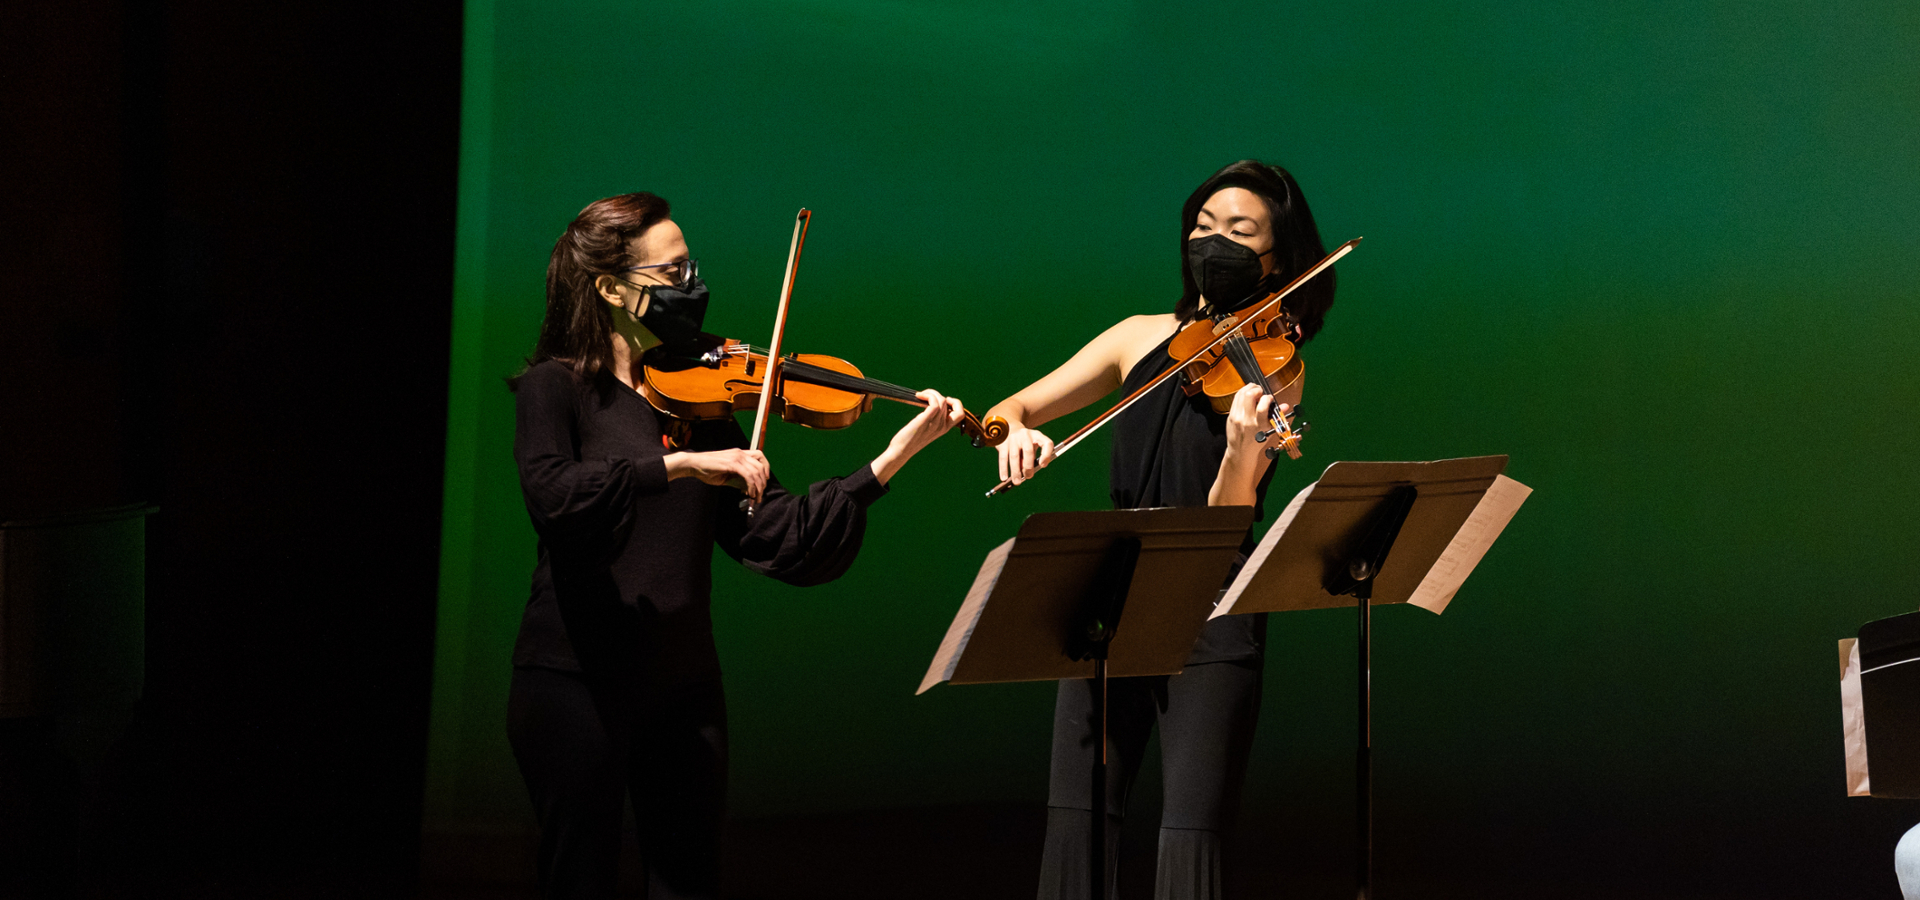 Dr. Kirsten Yon and Dr. Mann-Wen Lo playing violin together in front of a turquoise background.